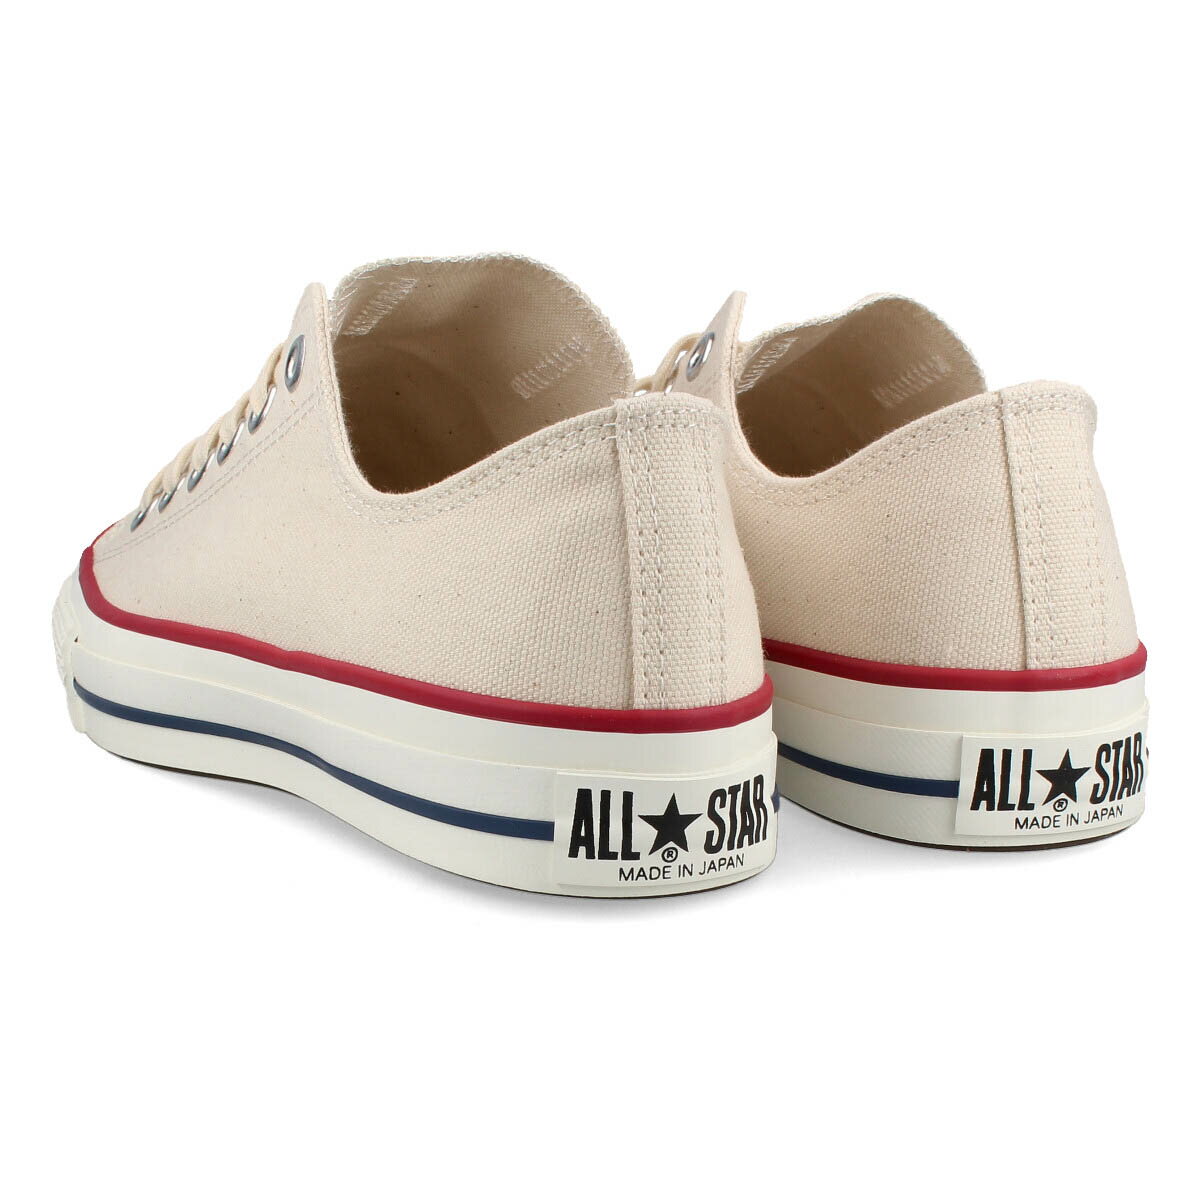 CONVERSE CANVAS ALL STAR J OX 【MADE IN JAPAN】【日本製】 コンバース オールスター J OX NATURAL WHITE